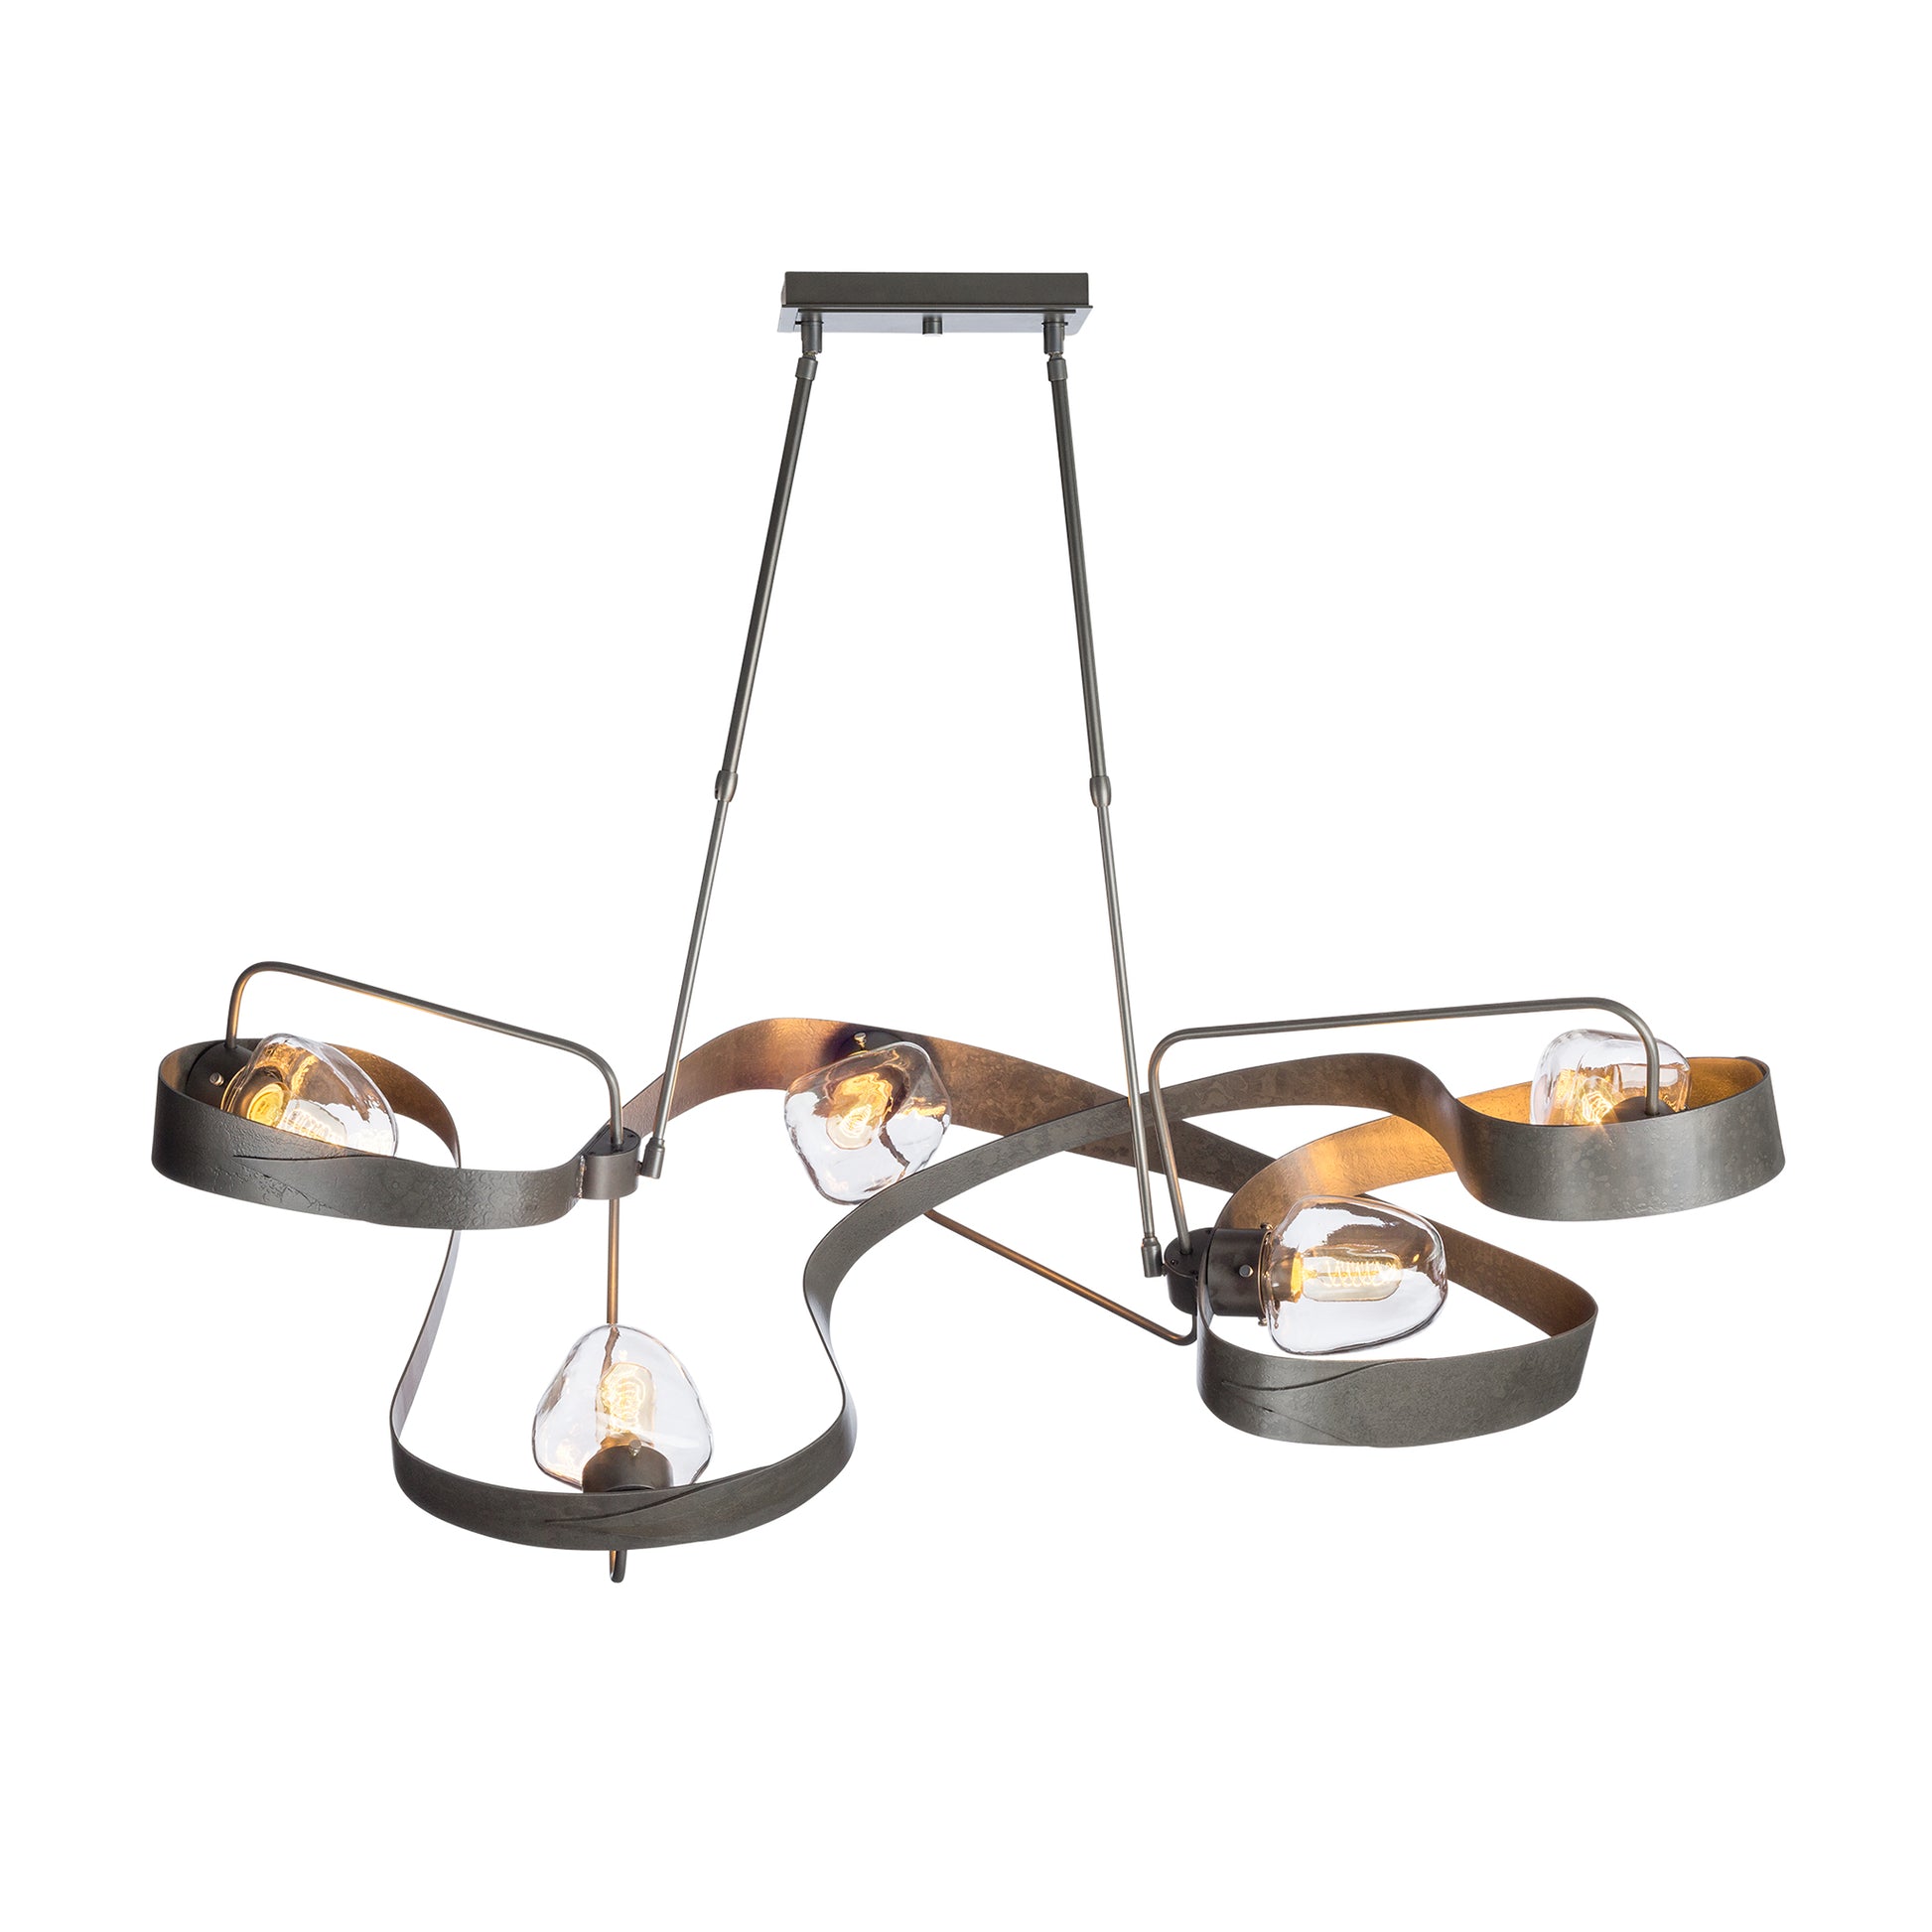 A Hubbardton Forge Graffiti Pendant featuring a metal frame and glass shades.